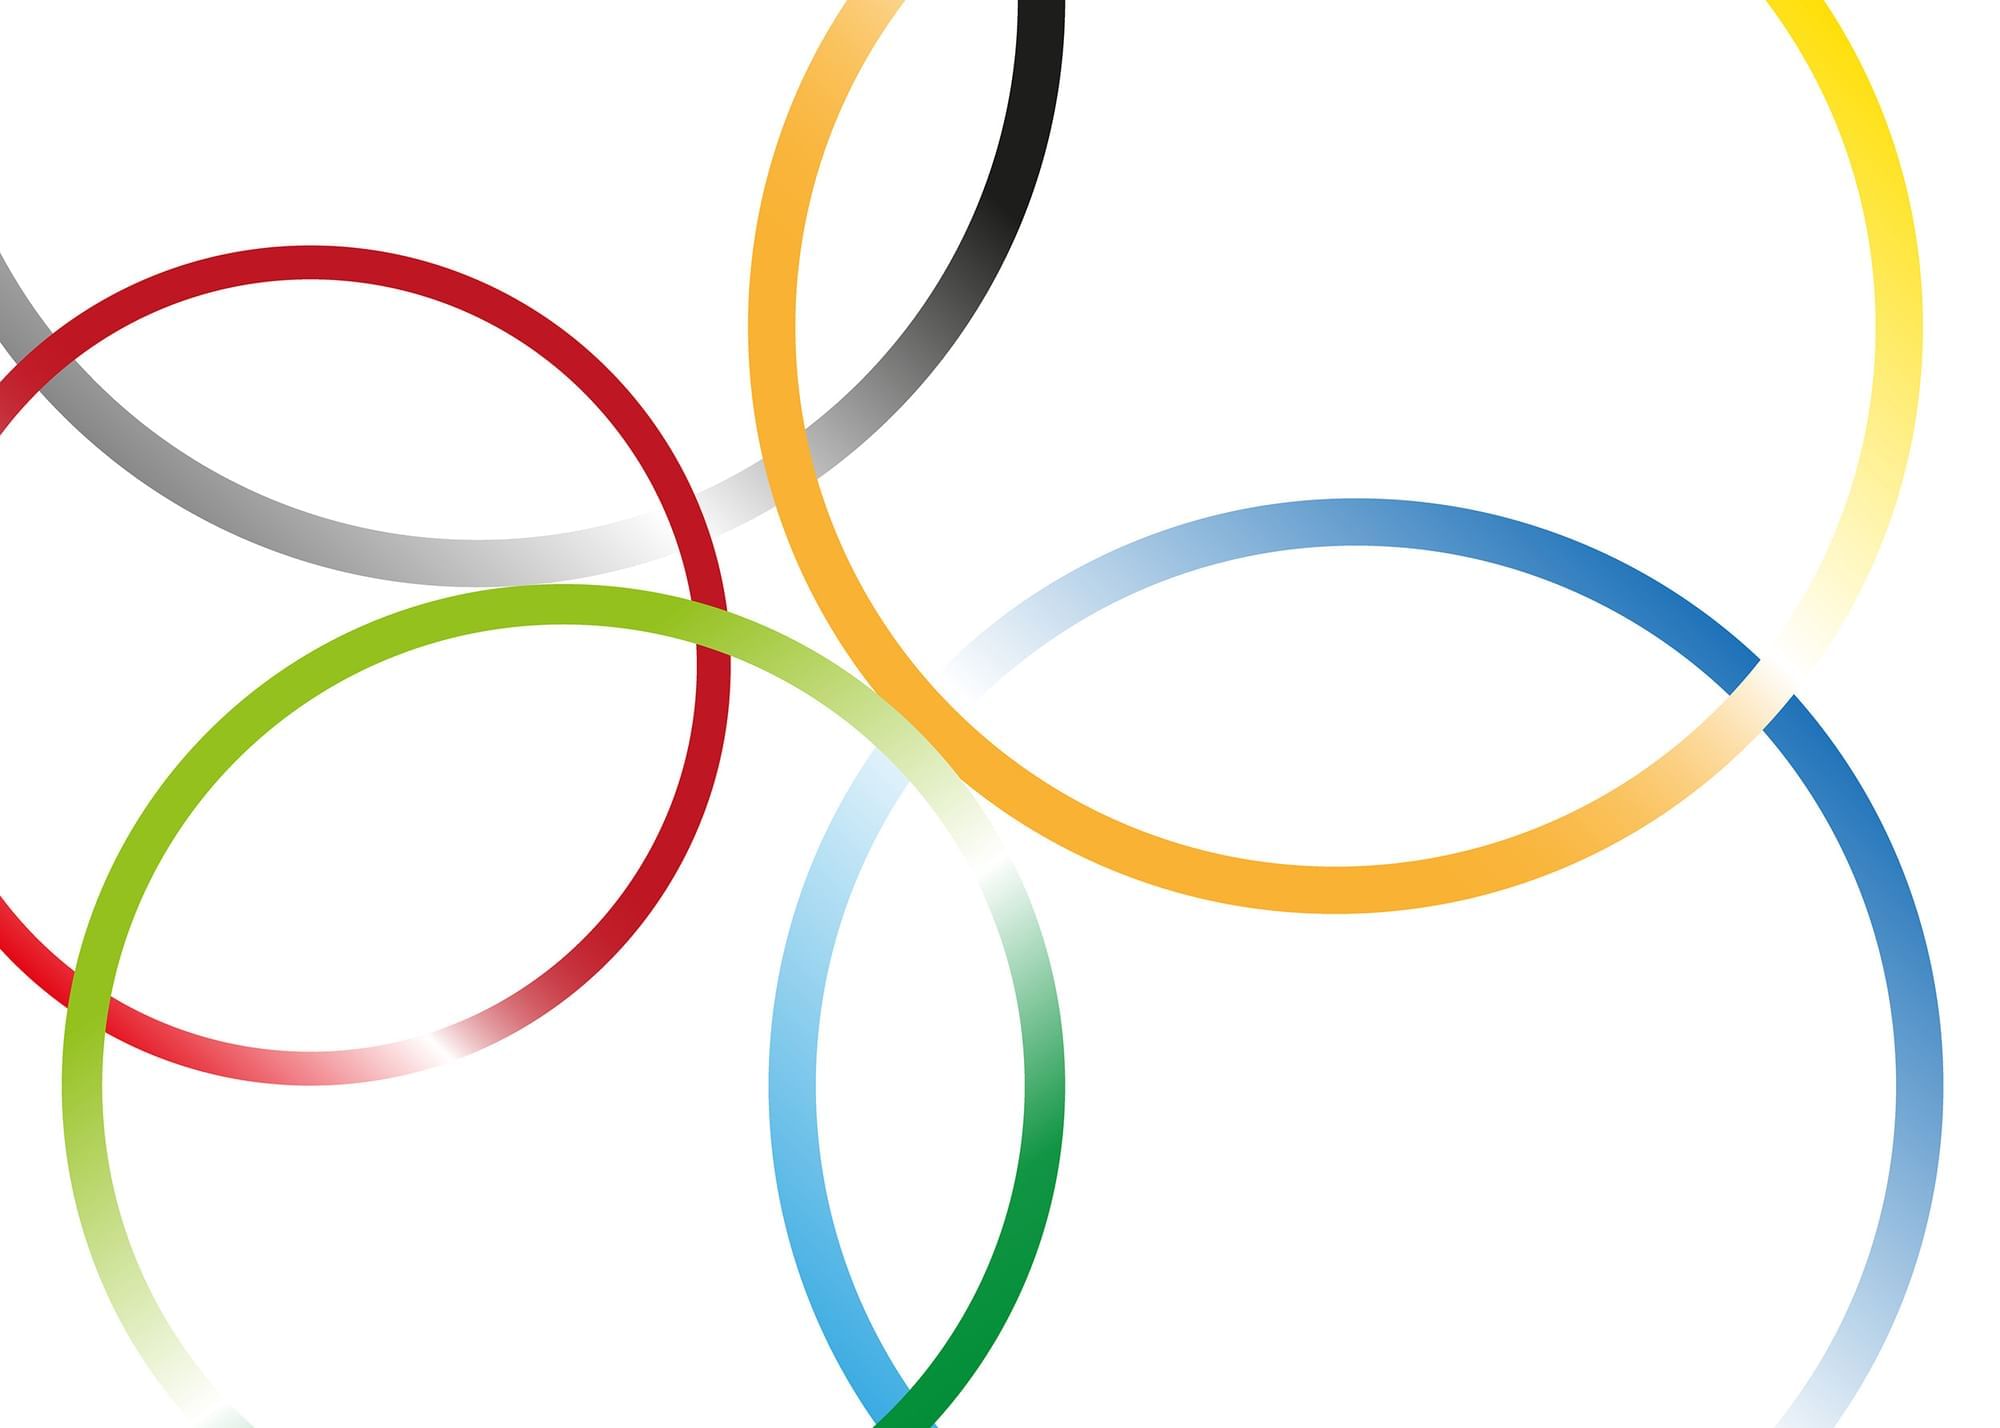 Logo of Olympic colored circles used at Warwick Paris Champs Elysées